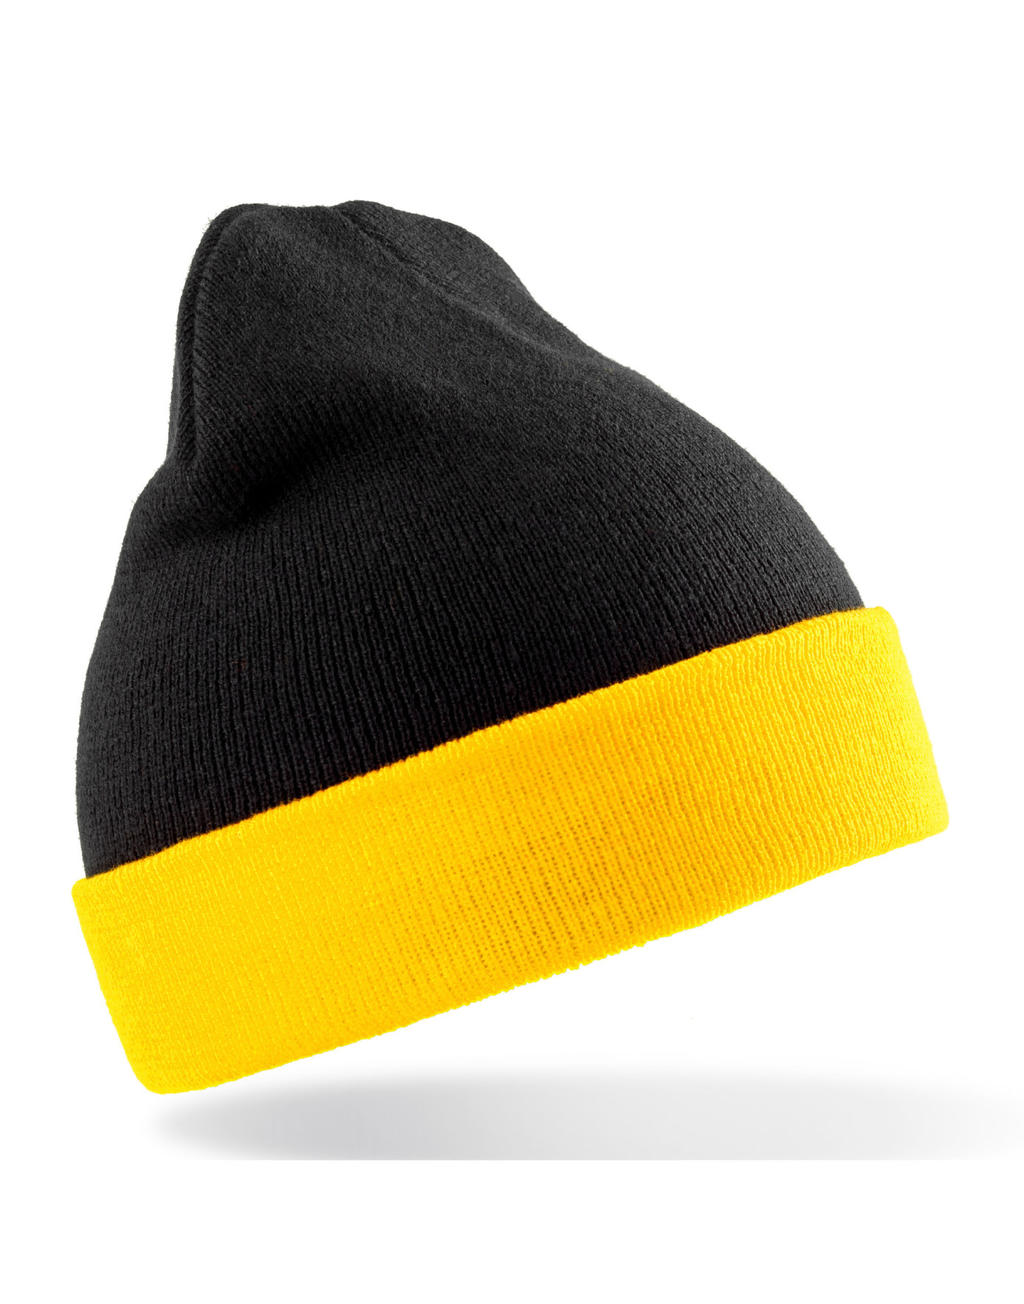  Recycled Black Compass Beanie in Farbe Black/Yellow